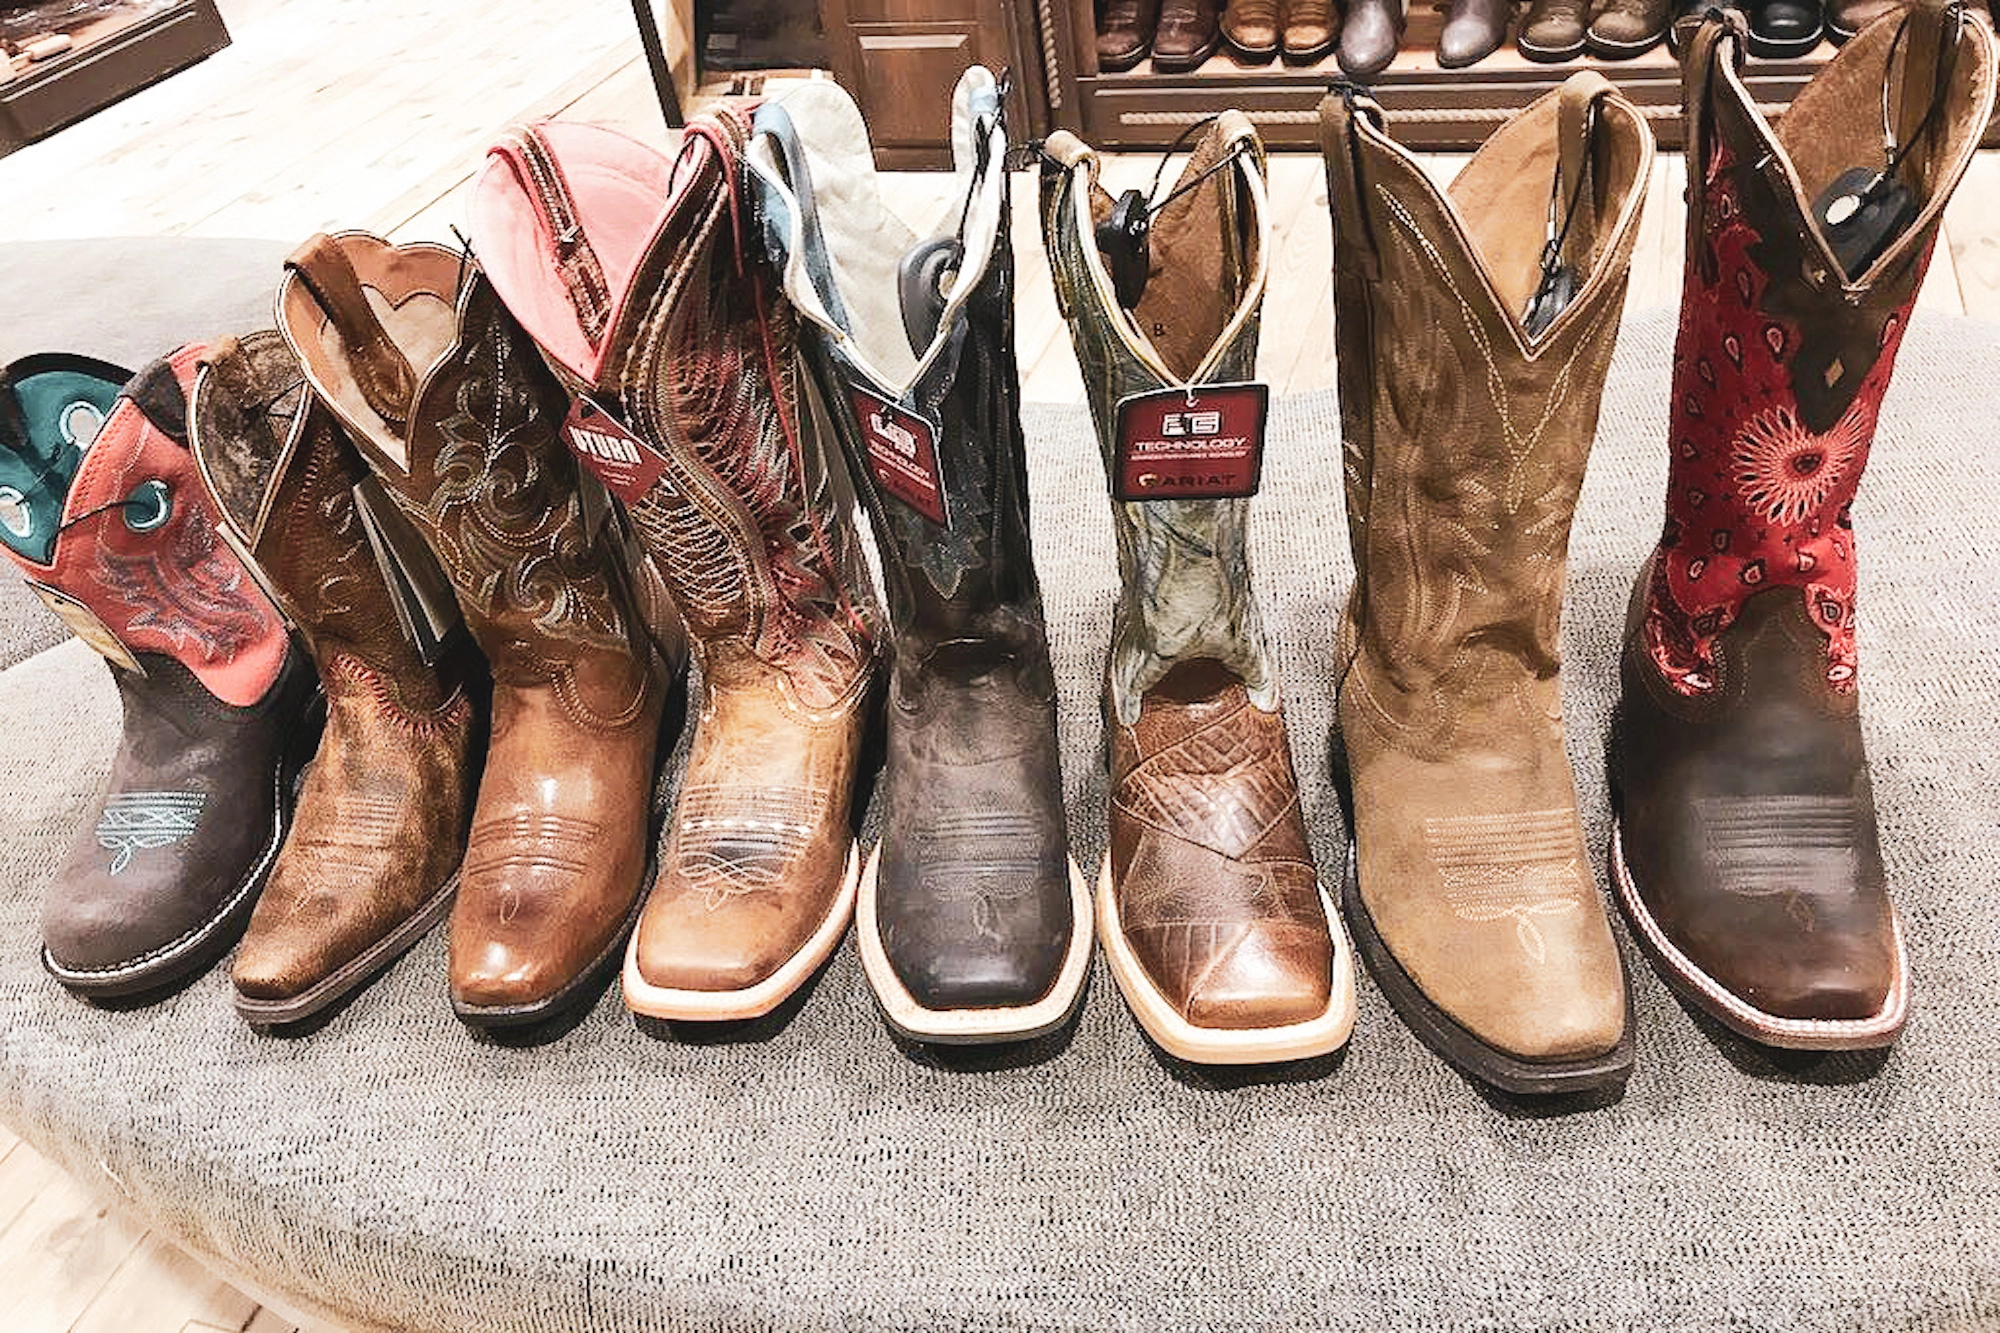 It might not seem like much, but cowboy boots are stylish, so keeping style in mind when shopping is very important.